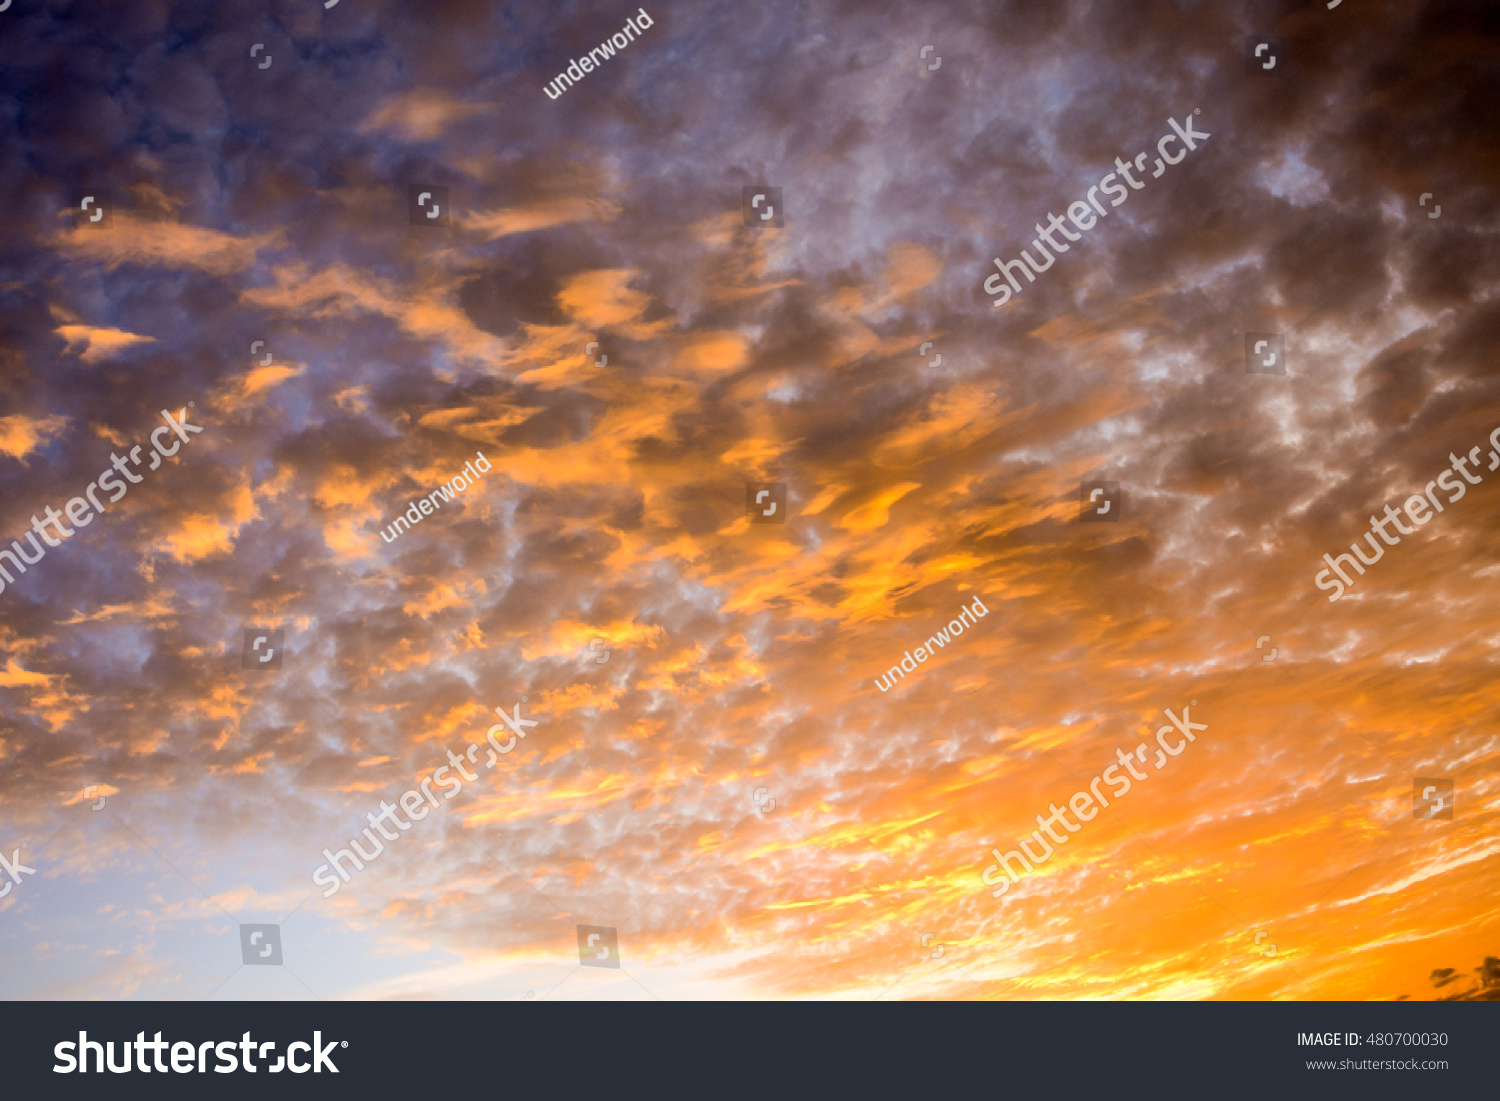 Cloudscape, Colored Clouds at Sunset near the Ocean #480700030